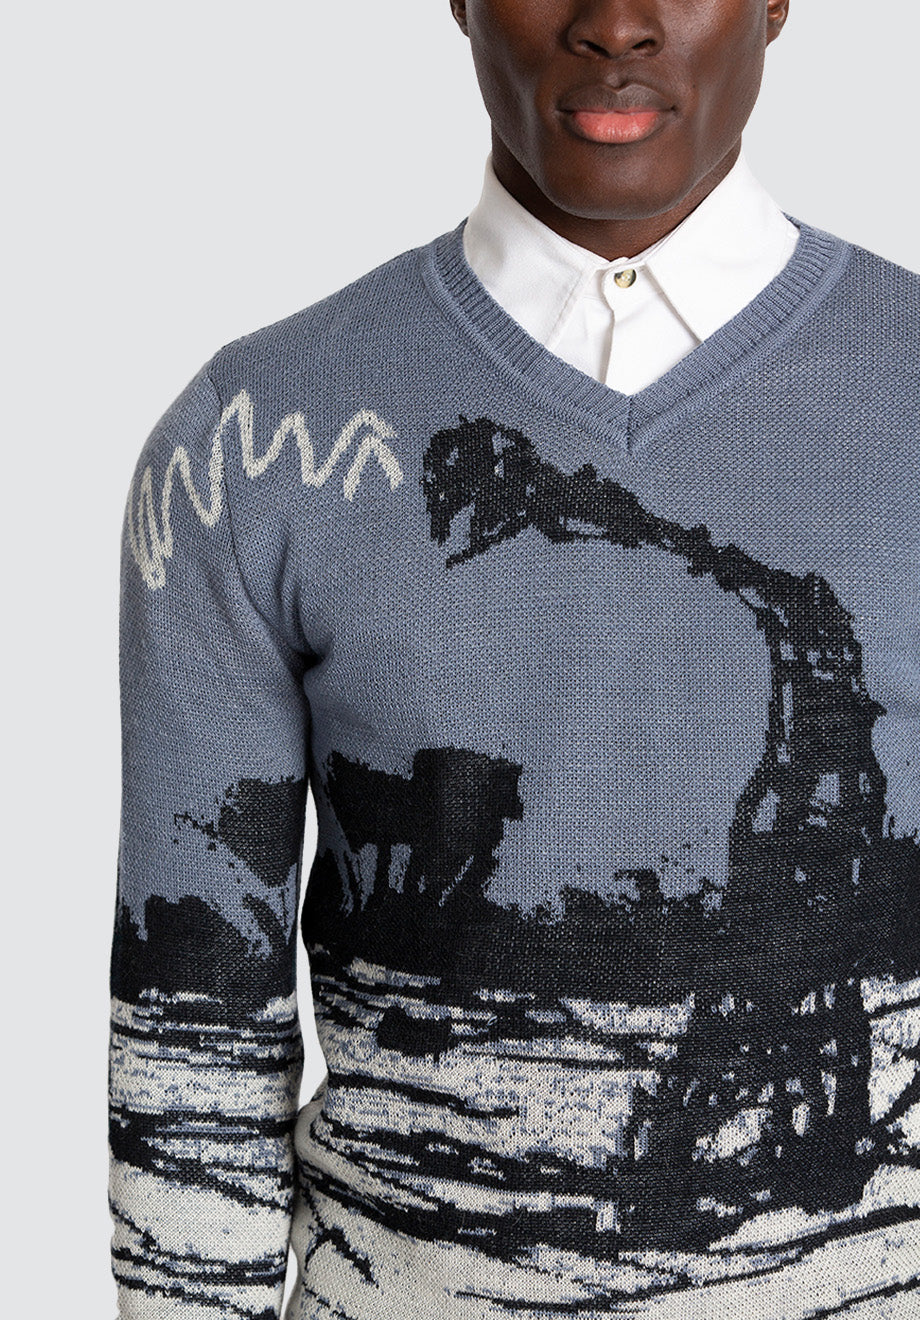 Wool & Mohair Sweater Collaboration featuring Themba Khumalo